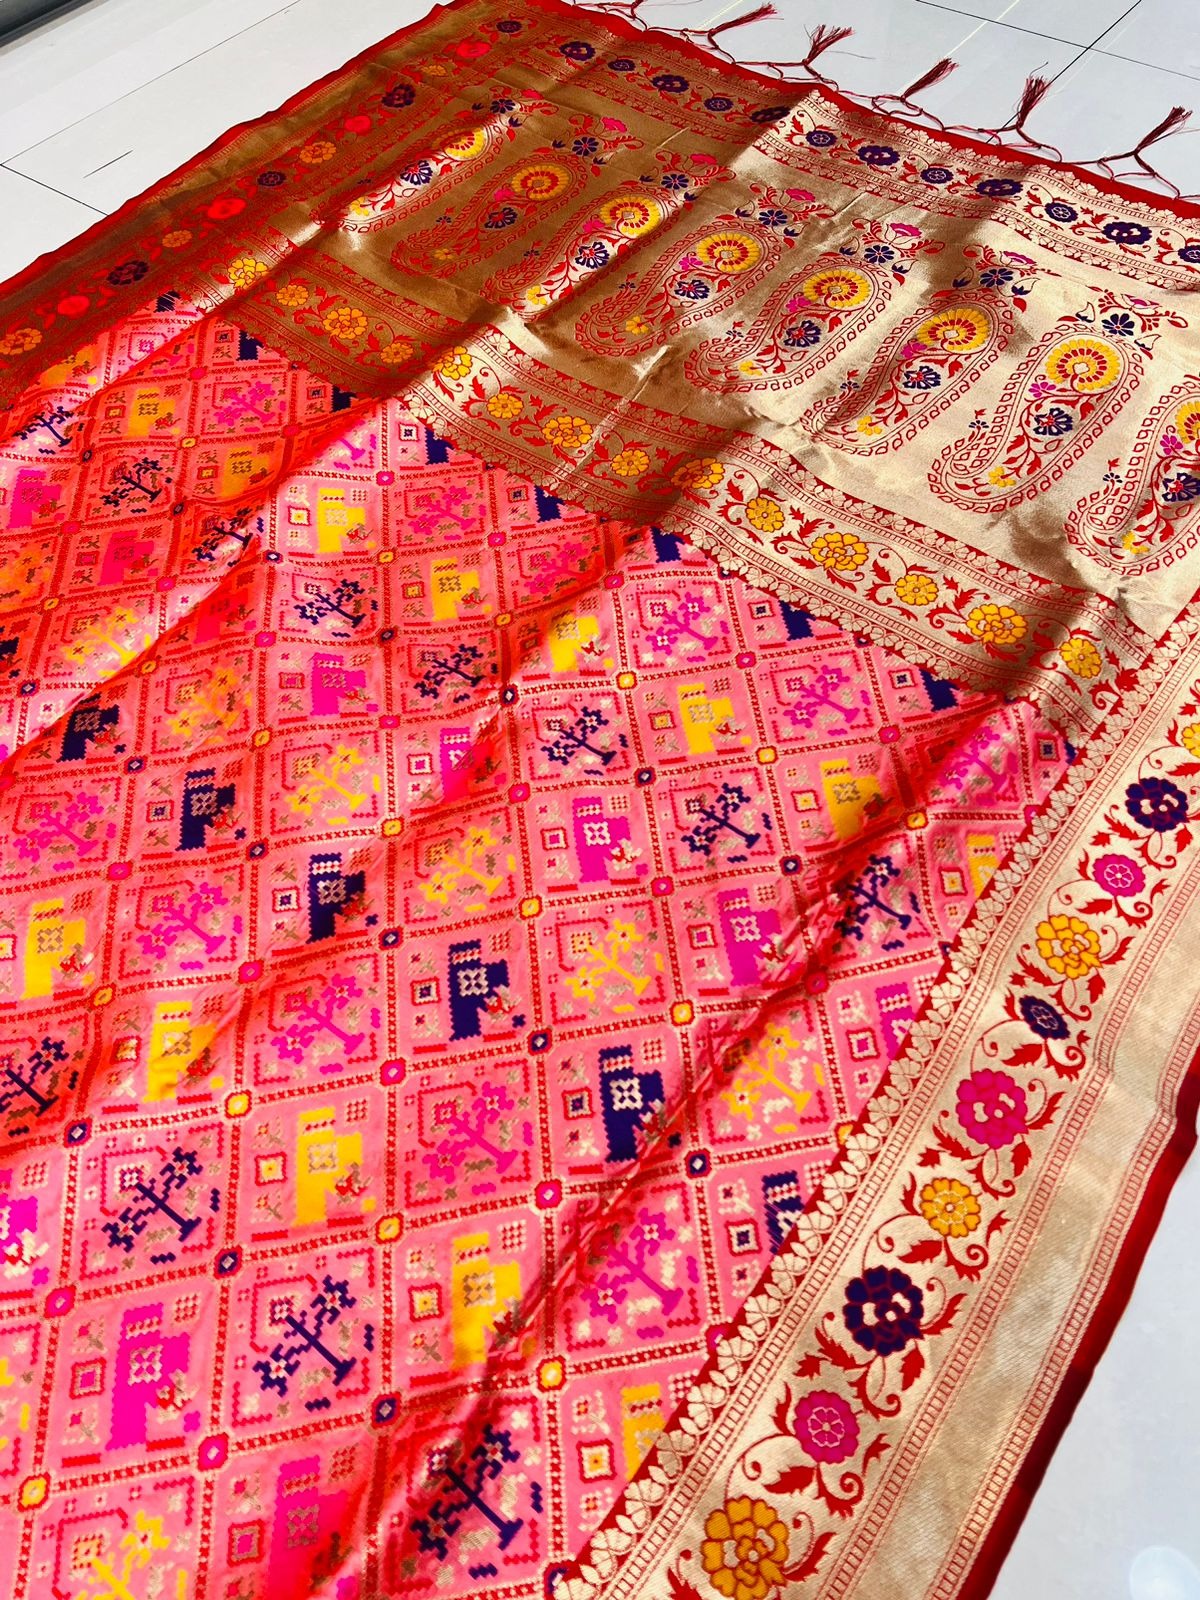 Woebegone Peach Paithani Silk Saree With Exquisite Blouse Piece